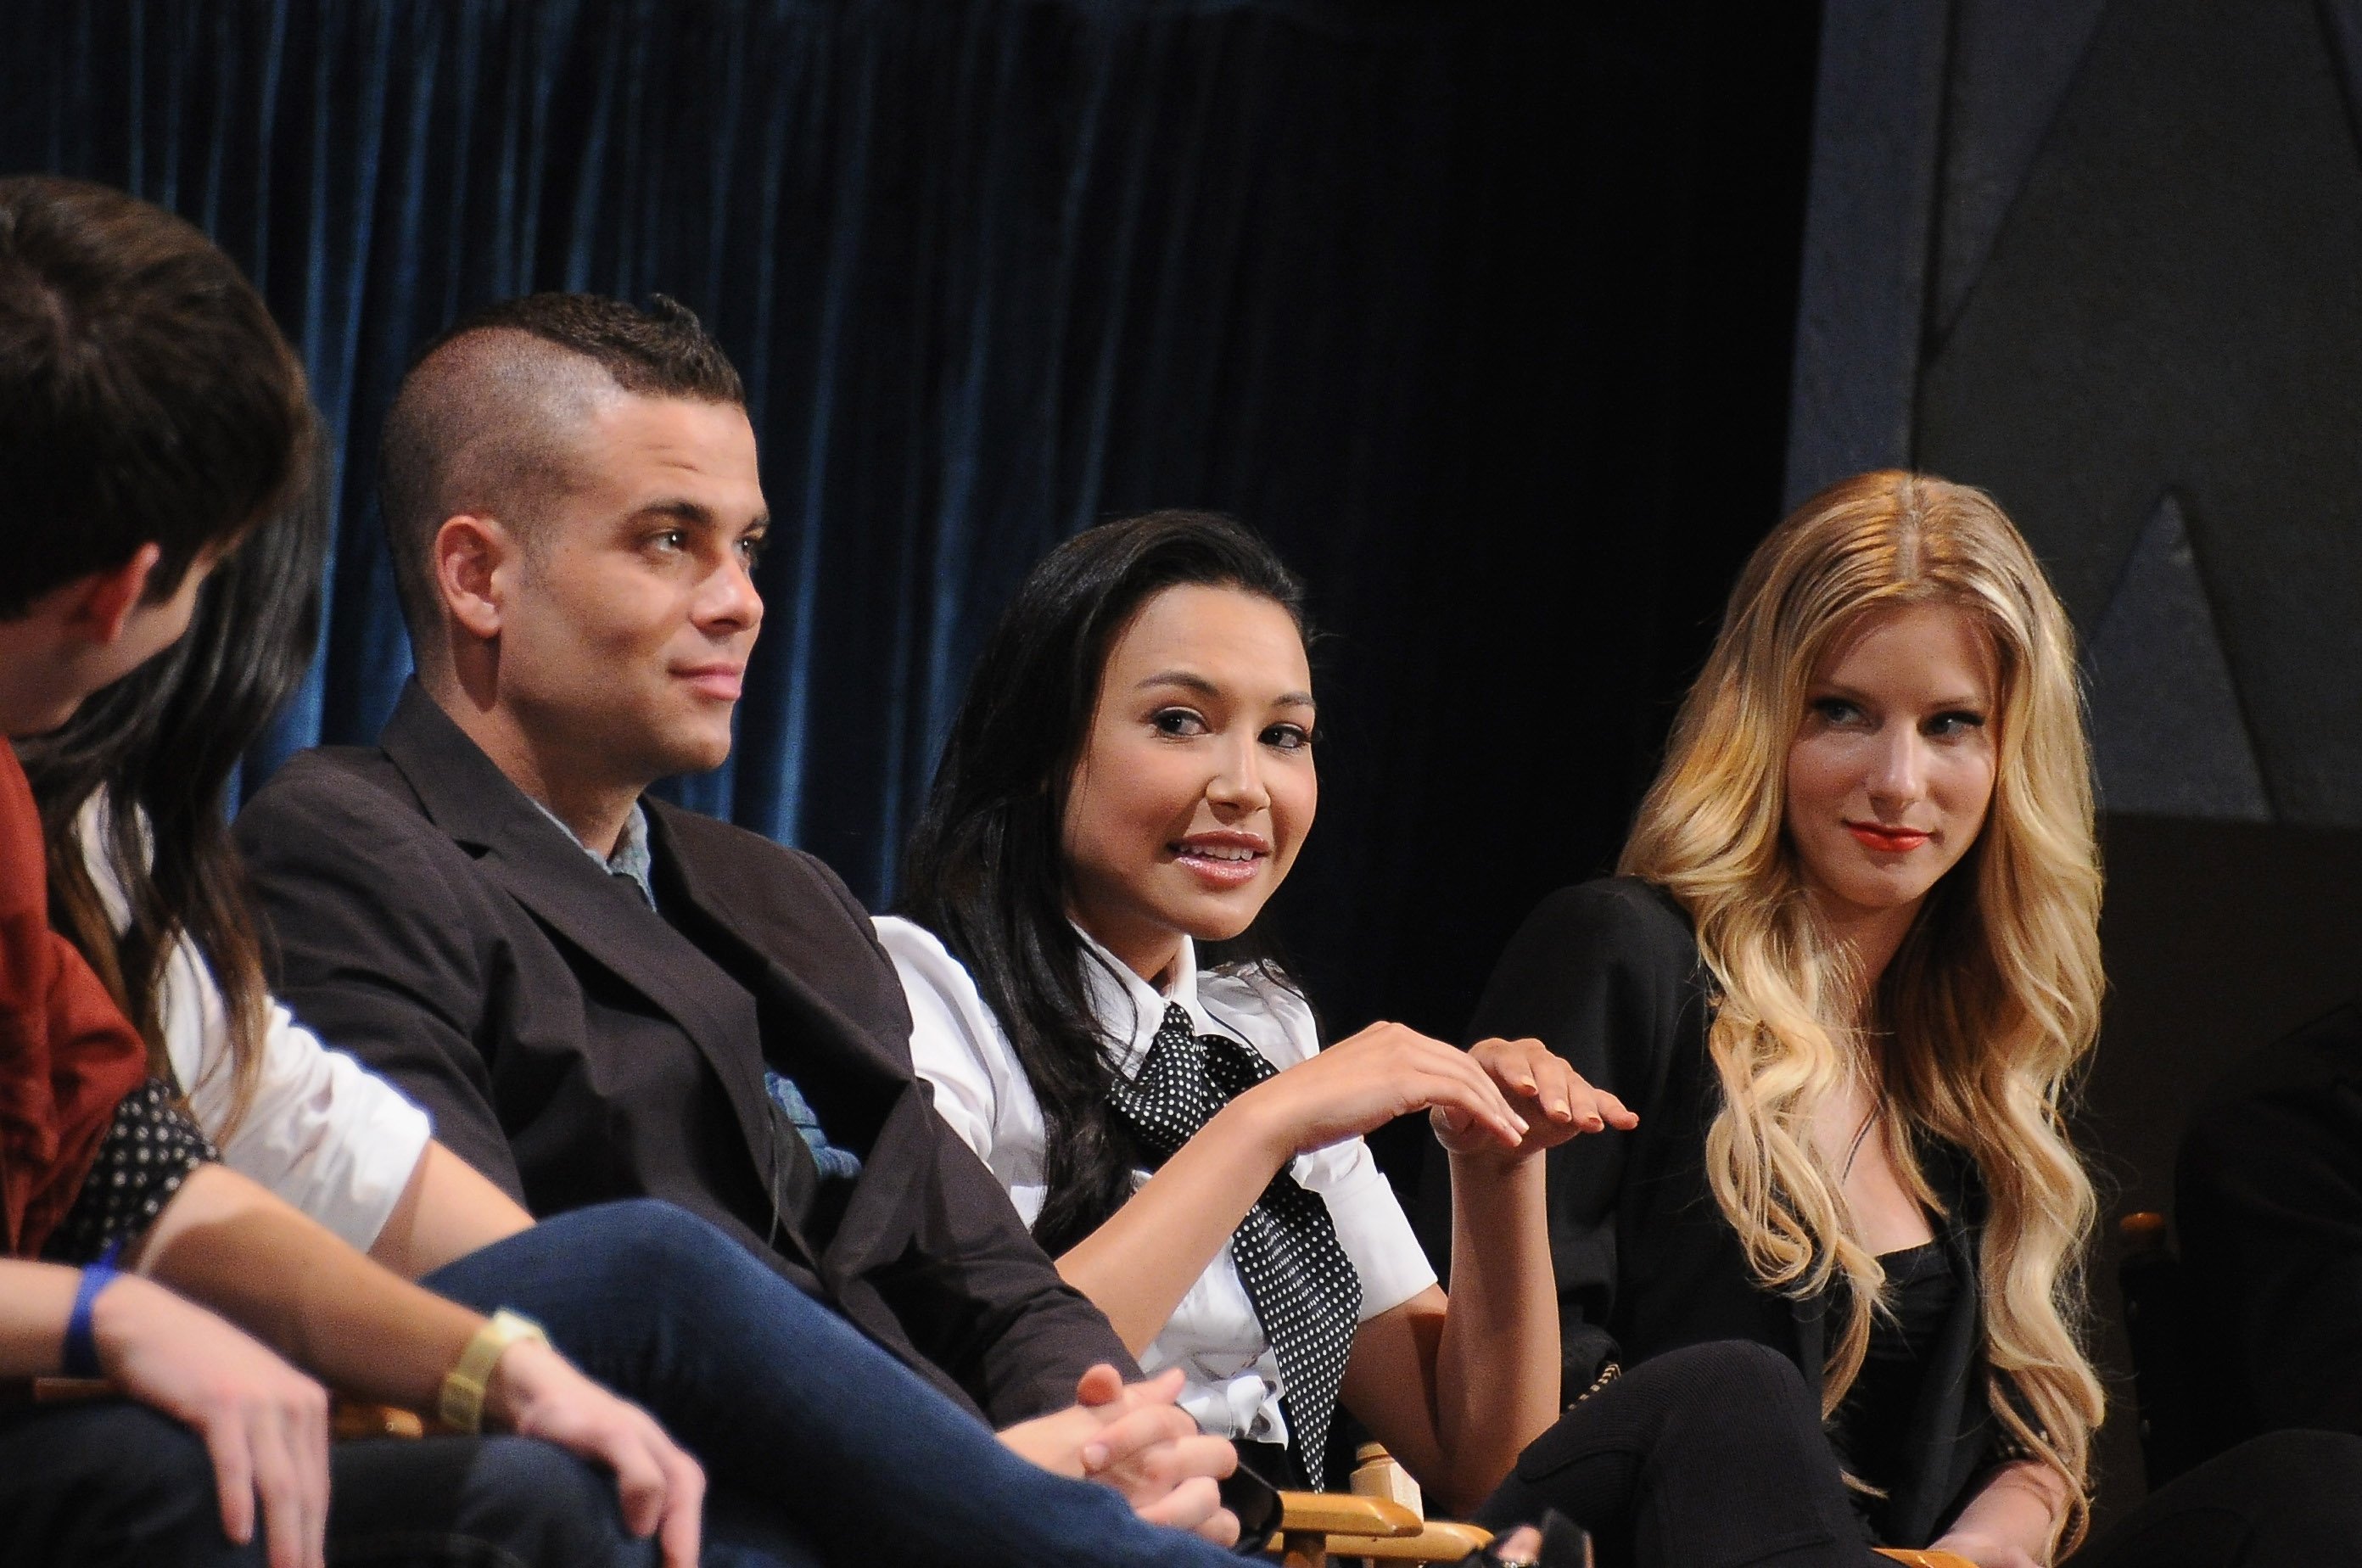 Naya Rivera Said Her Relationship With Mark Salling Was ‘Completely Dysfunctional’